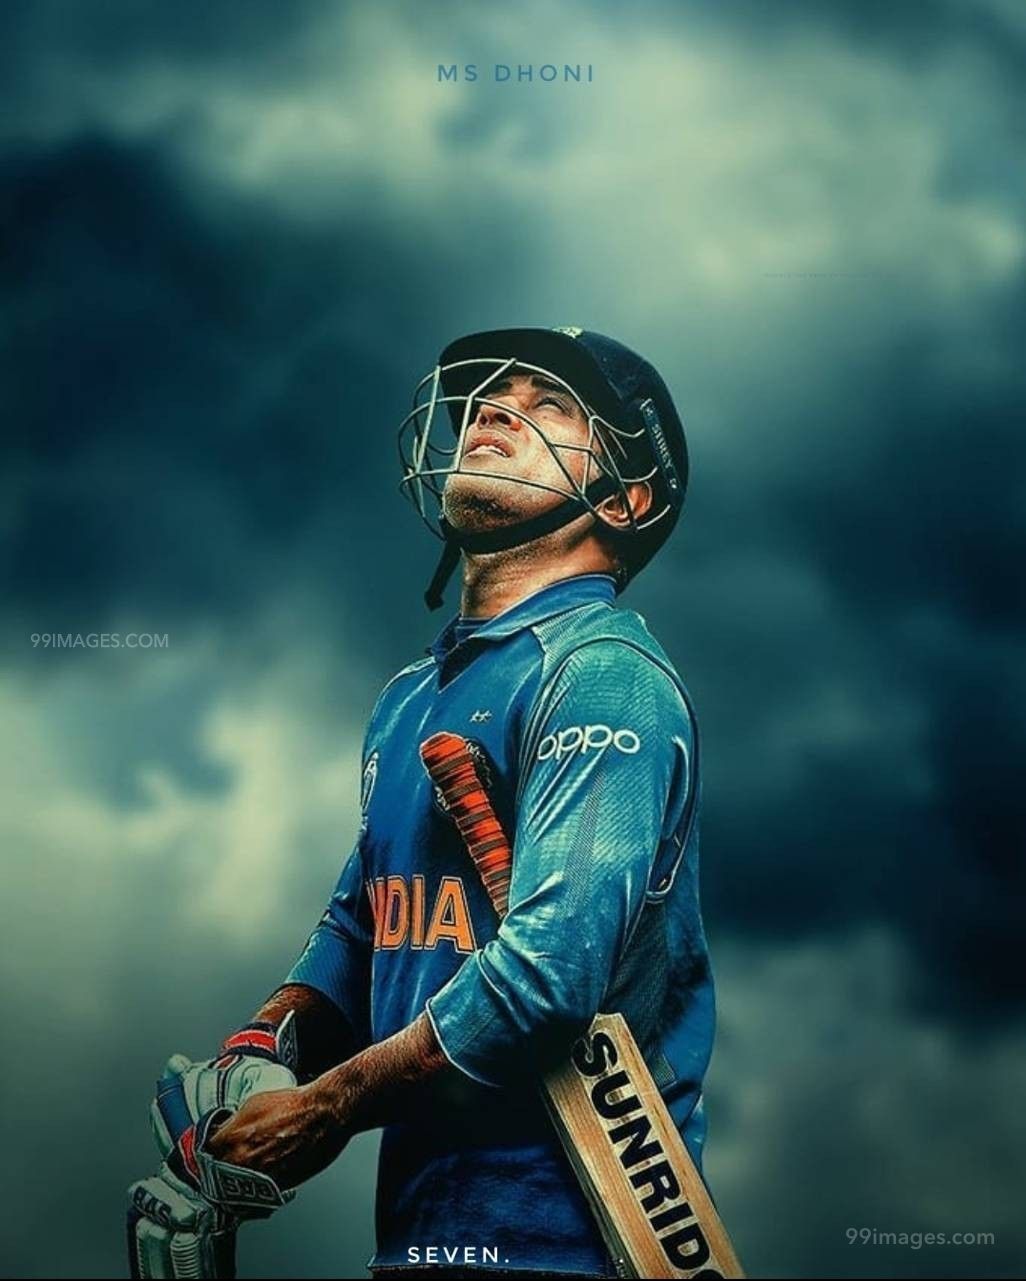 MS Dhoni Wallpapers Top 35 Dhoni Wallpapers HQ, 43% OFF